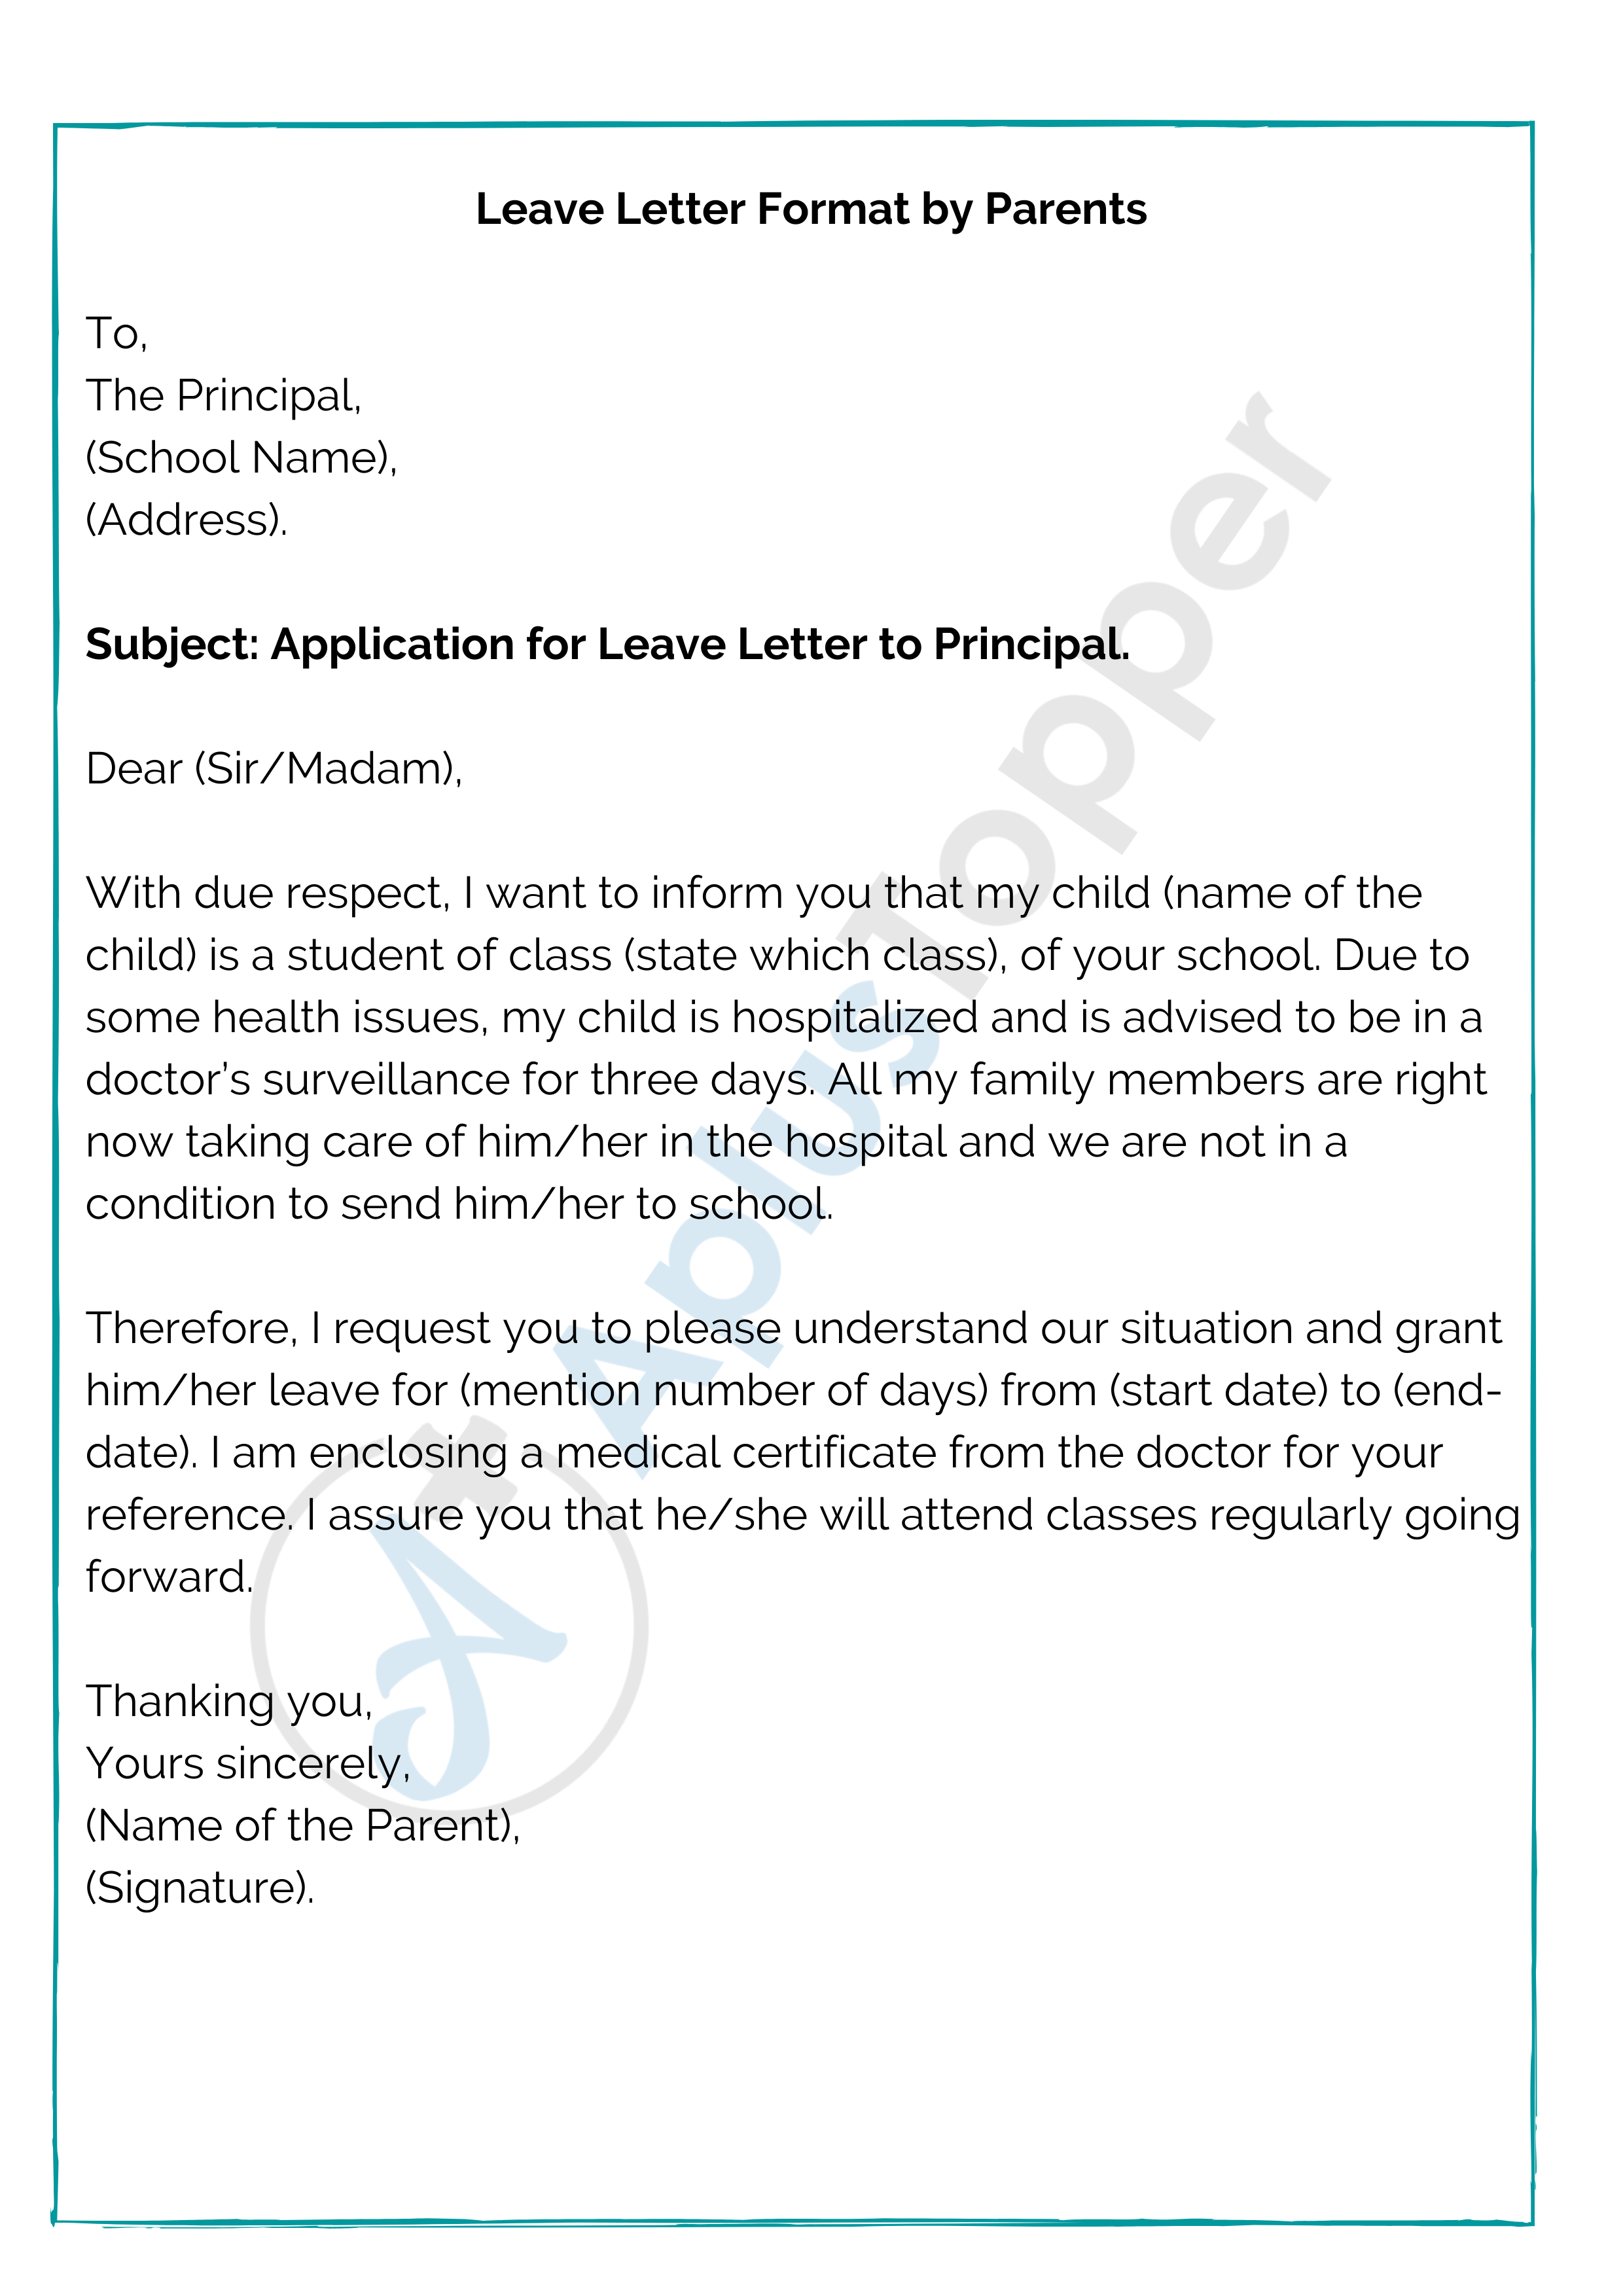 how to write a leave application letter to the teacher